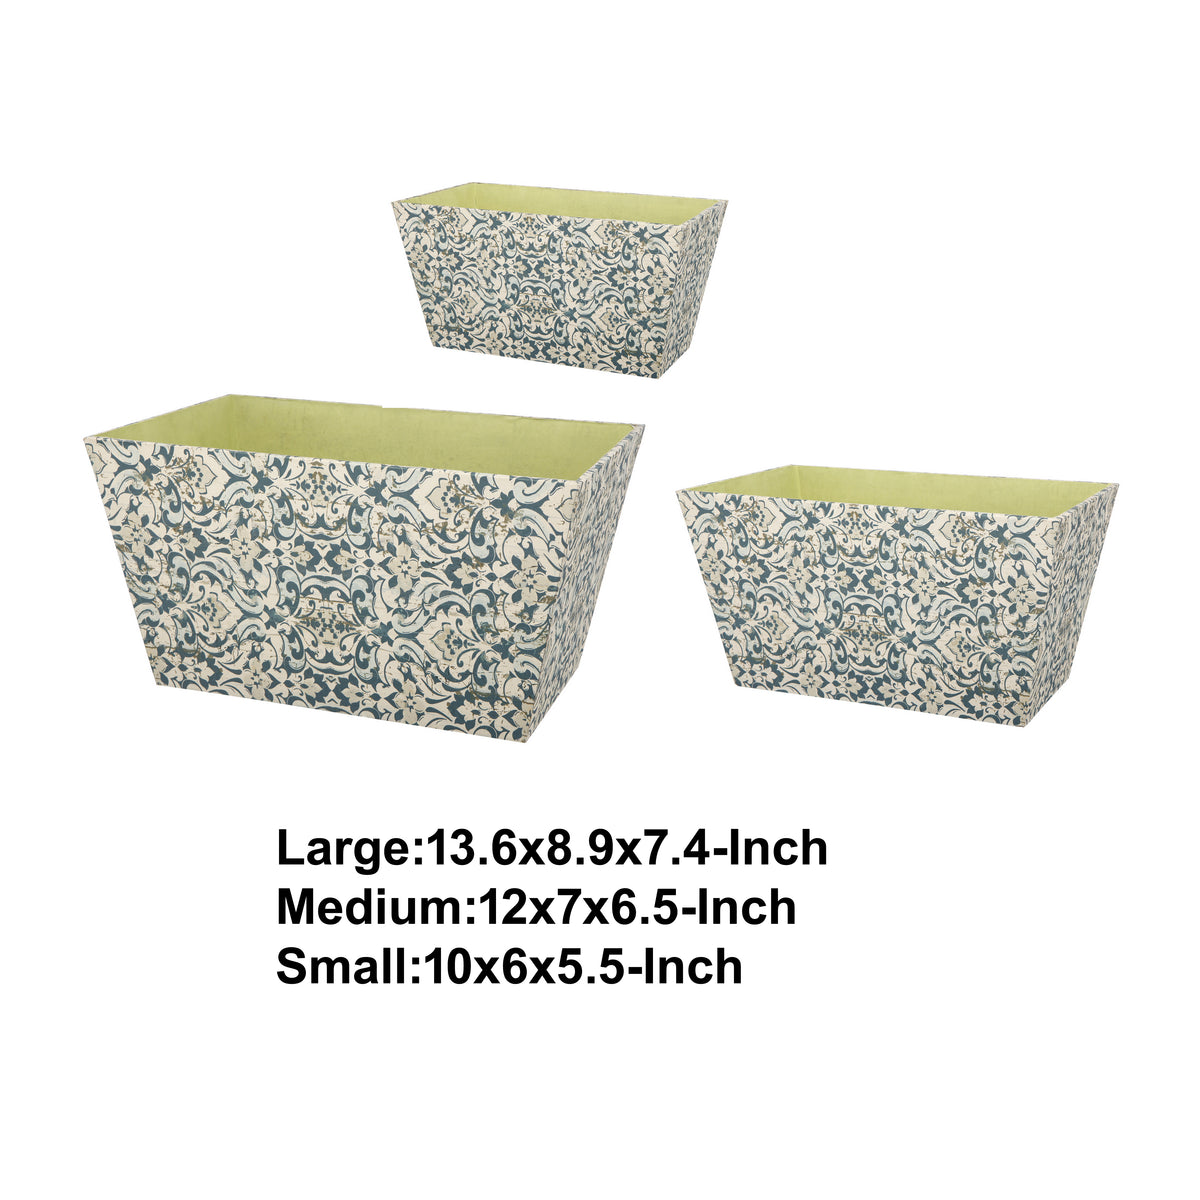 Rectangular Containers with Narrow Bottom, Set of 3, Blue and Beige - BM206718